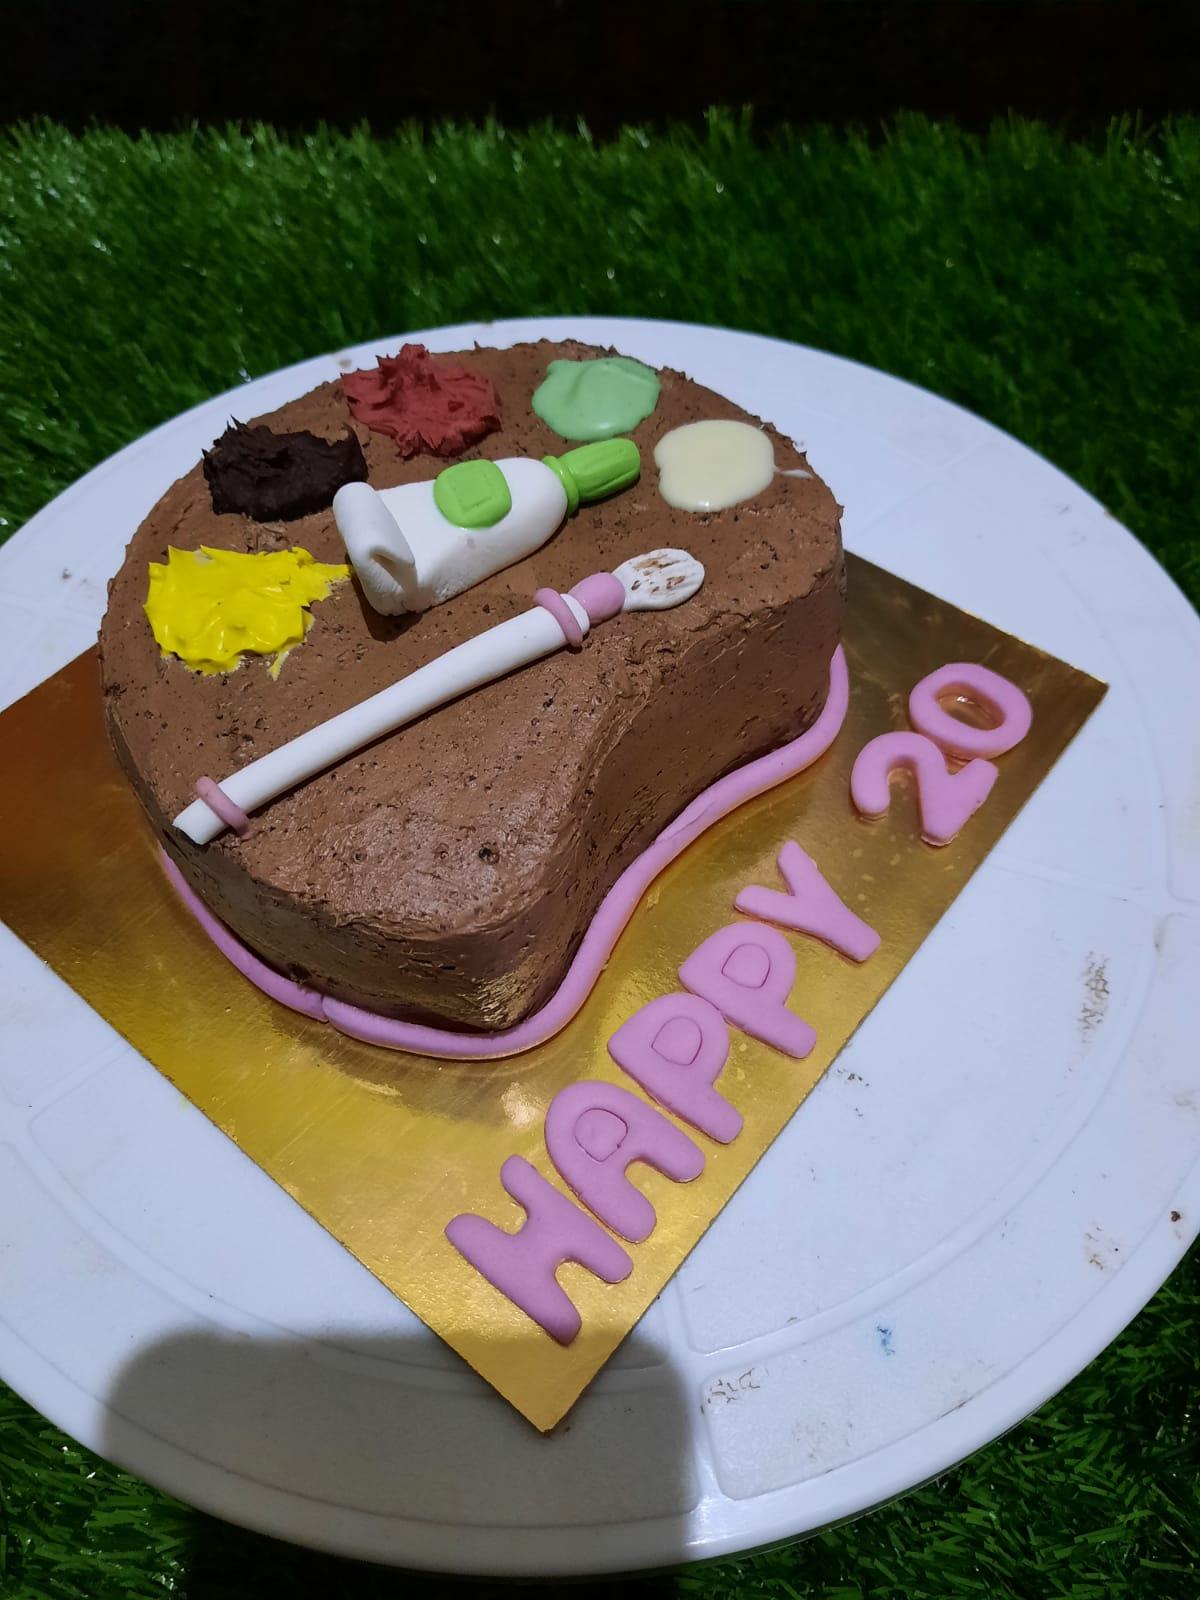 Cakelicious (Home Bakery) | Eggless cakes In Adelaide | Vegan cakes in  Adelaide - Cakelicious is best cake shop in adelaide.